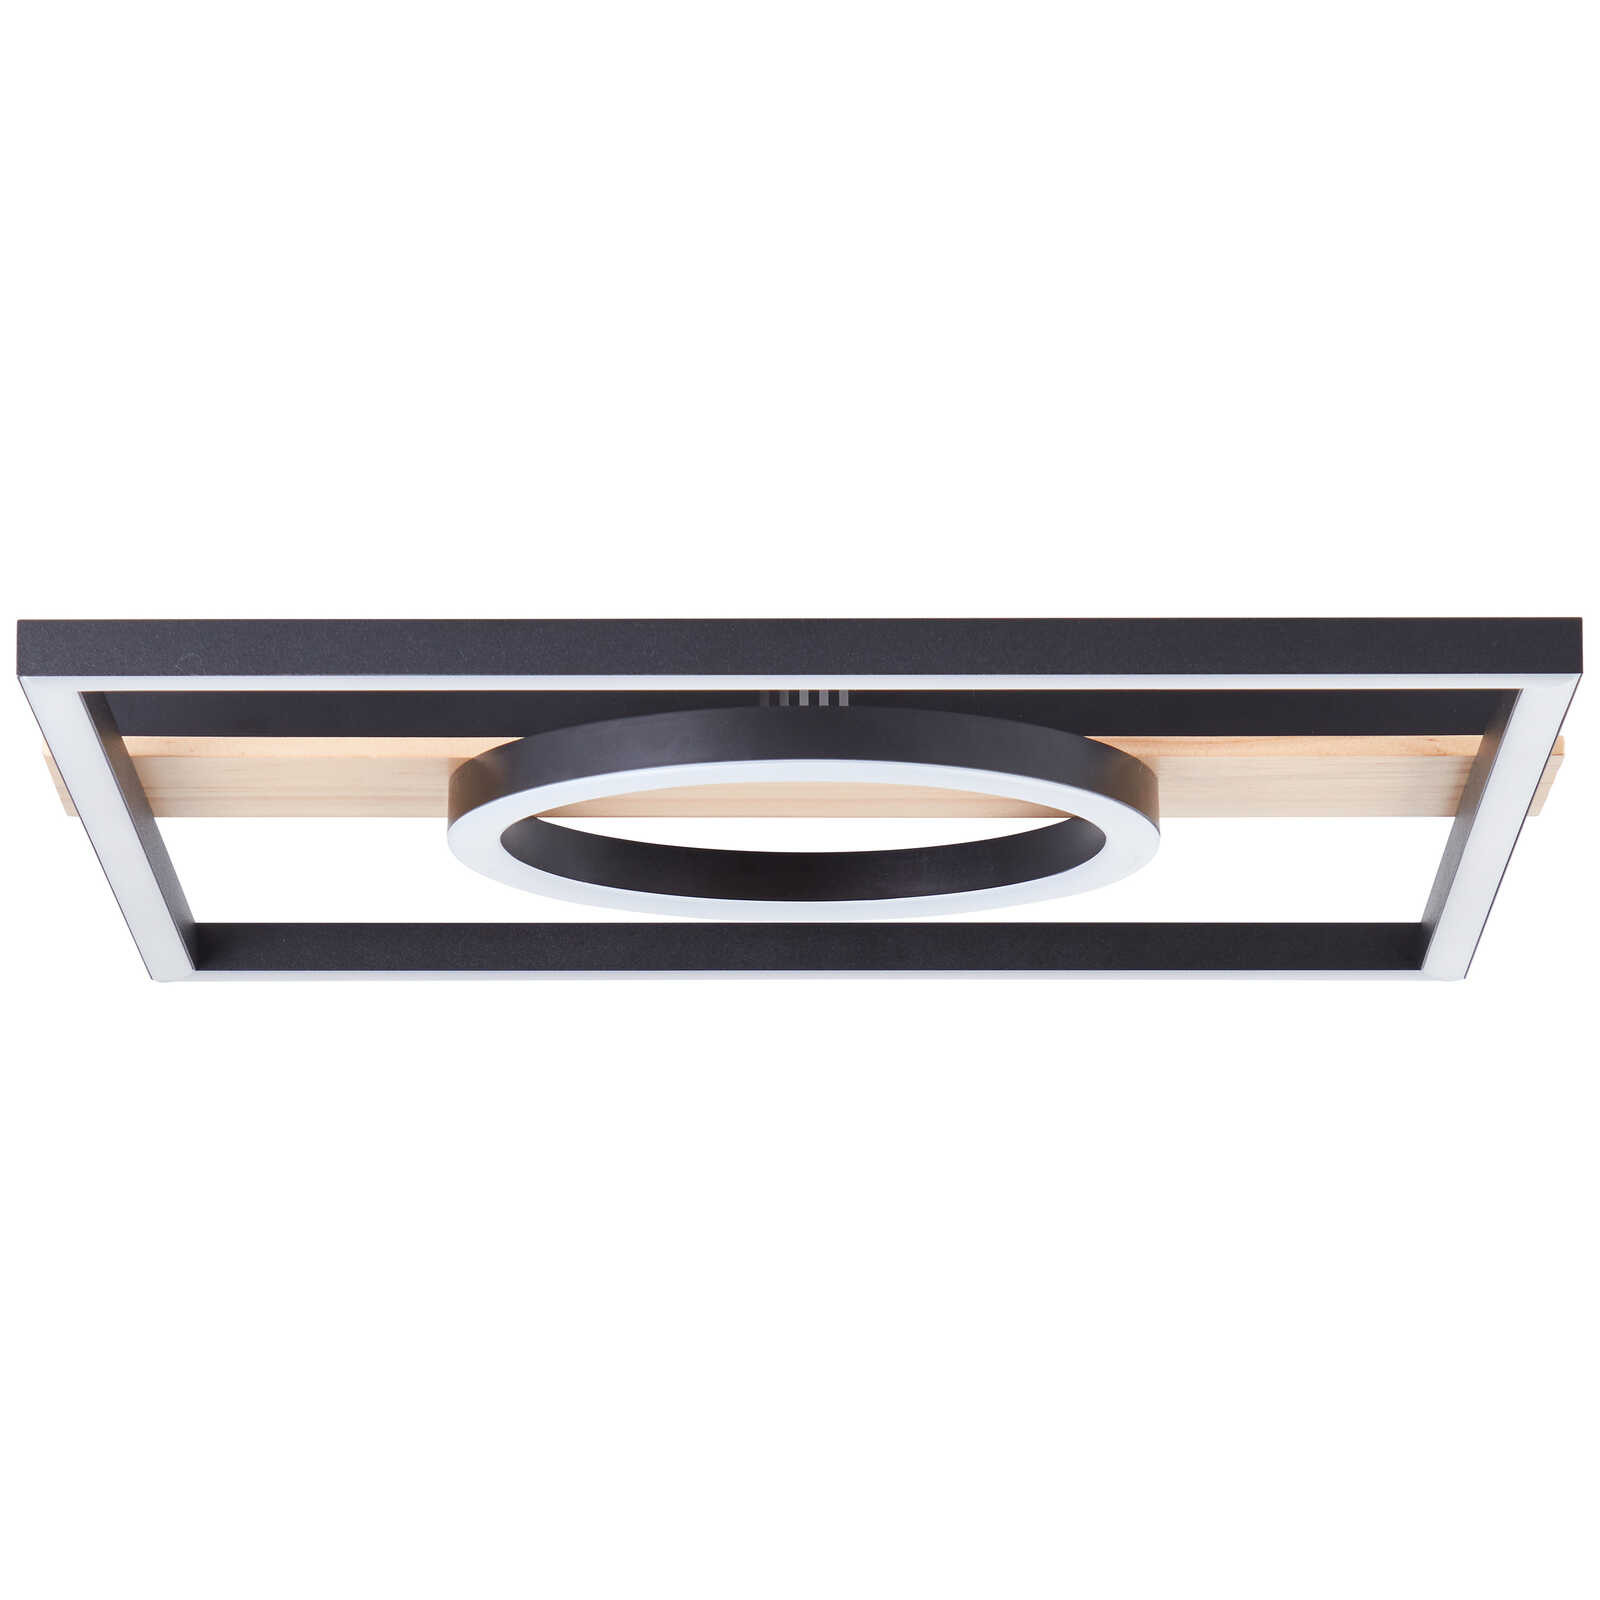             Wooden ceiling light - Leopold 4 - Brown
        